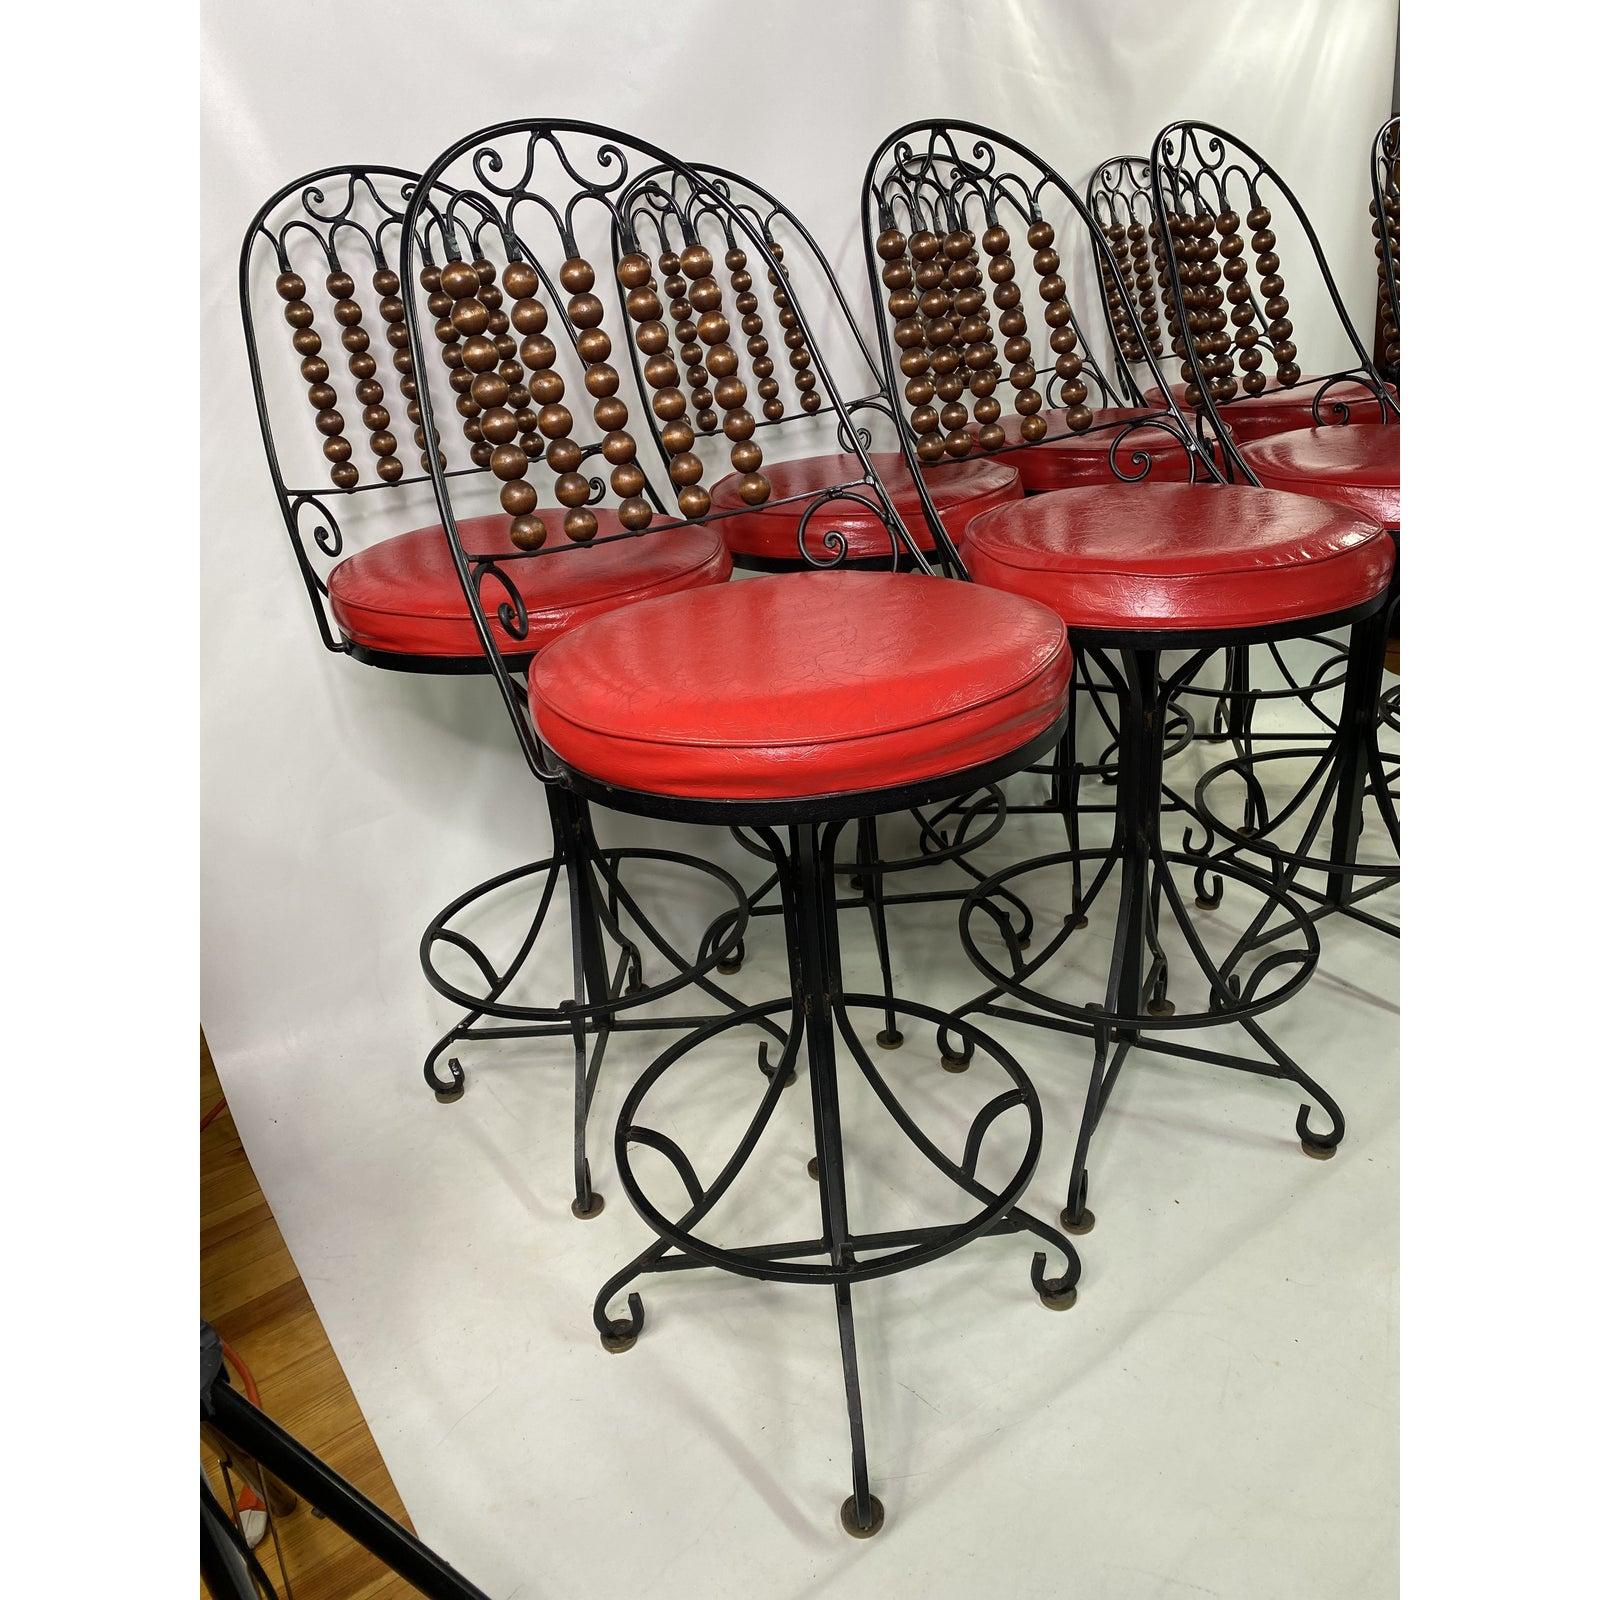 Vintage custom made Spanish revival wrought iron bar stools - set of 8. Stools are very well made and were ordered custom from a shop in the city.